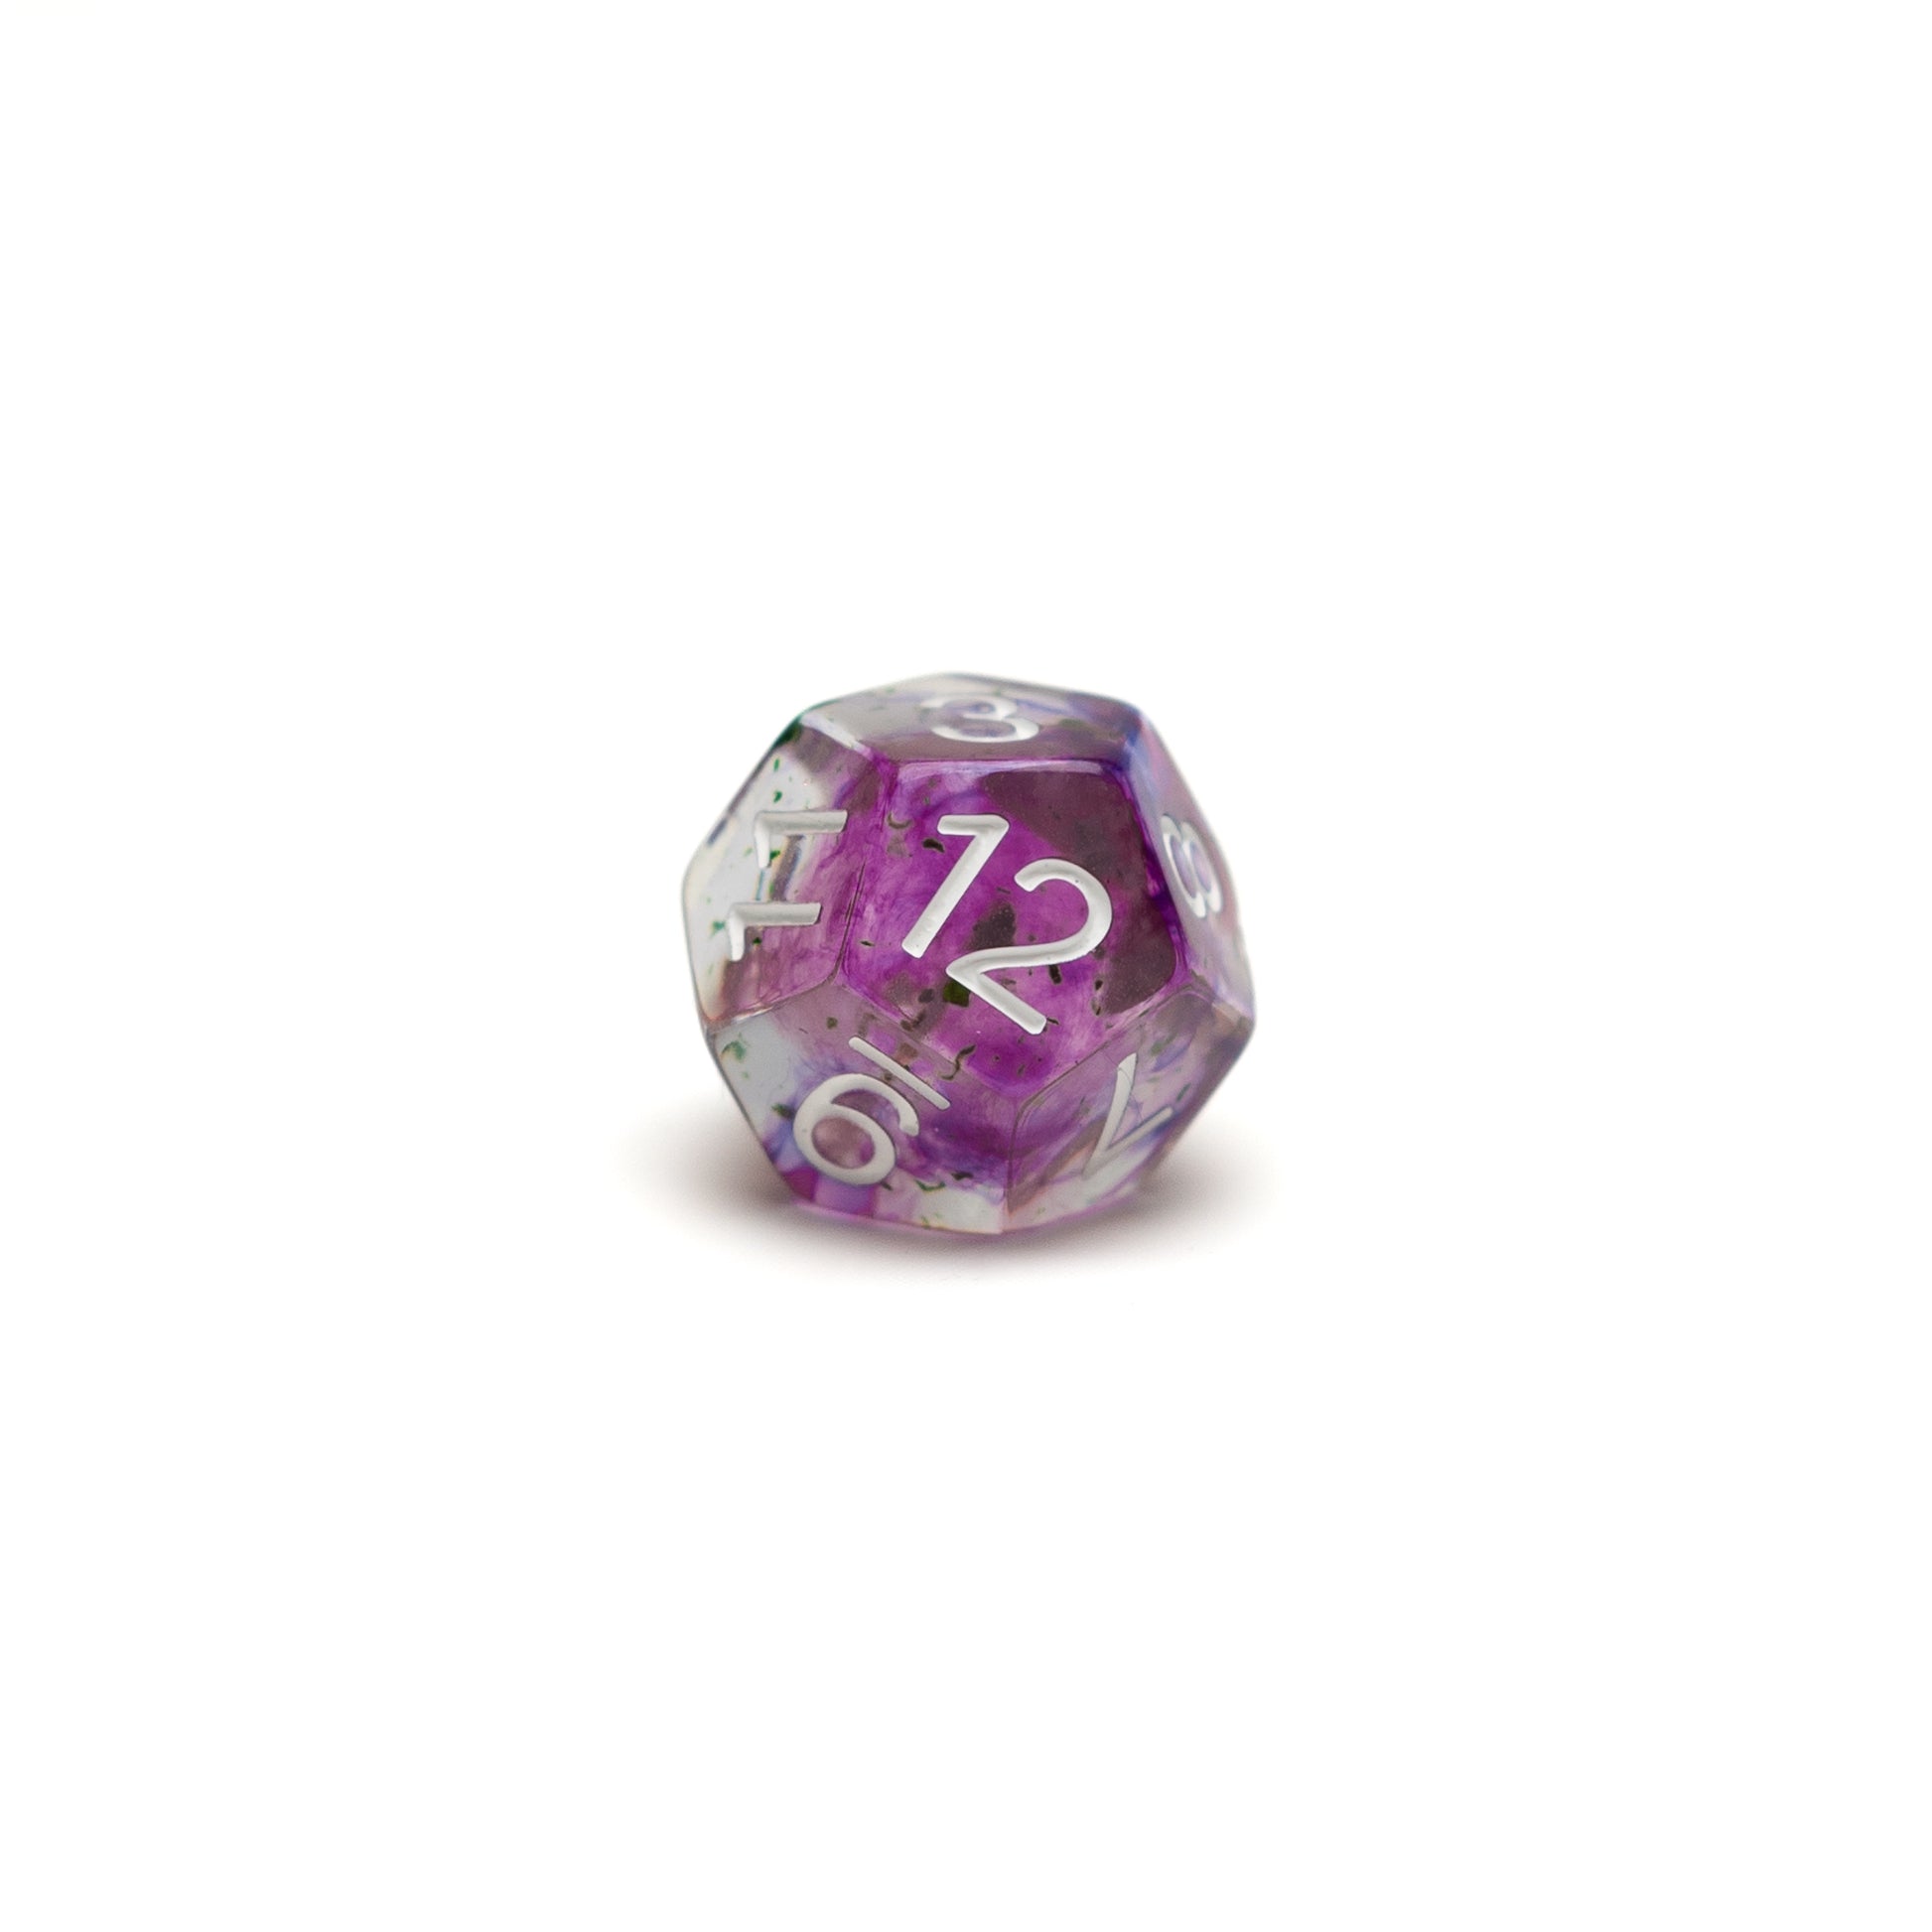 Roll Britannia Malrus and Milo Tosscobble Dungeons and Dragons D12 Dice with Swirling Purple and Green Glitter Aesthetic